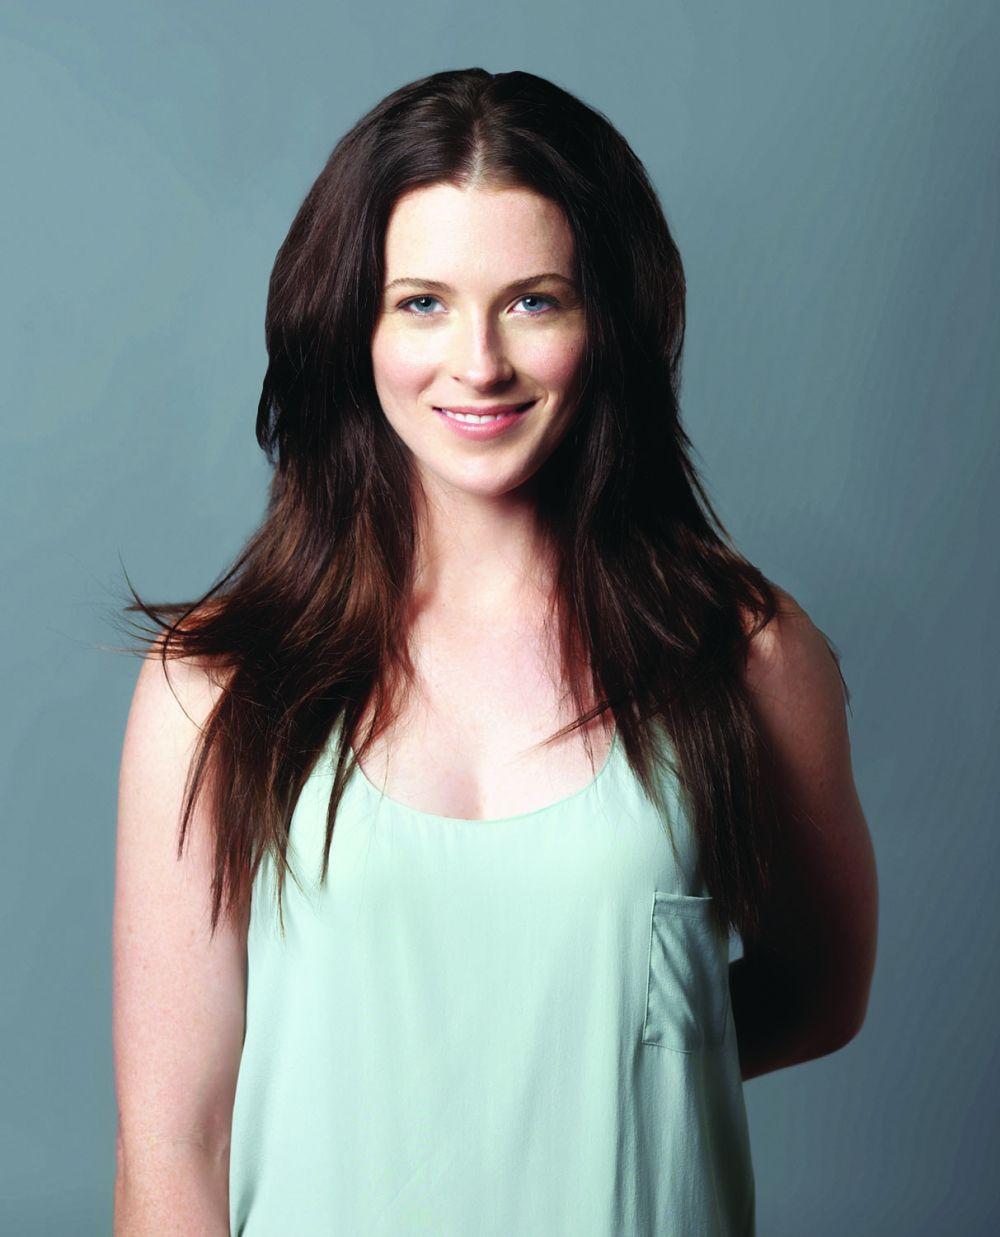 51 Hottest Bridget Regan Big Butt Pictures Will Drive You Wildly Enchanted With This Dashing Damsel 527